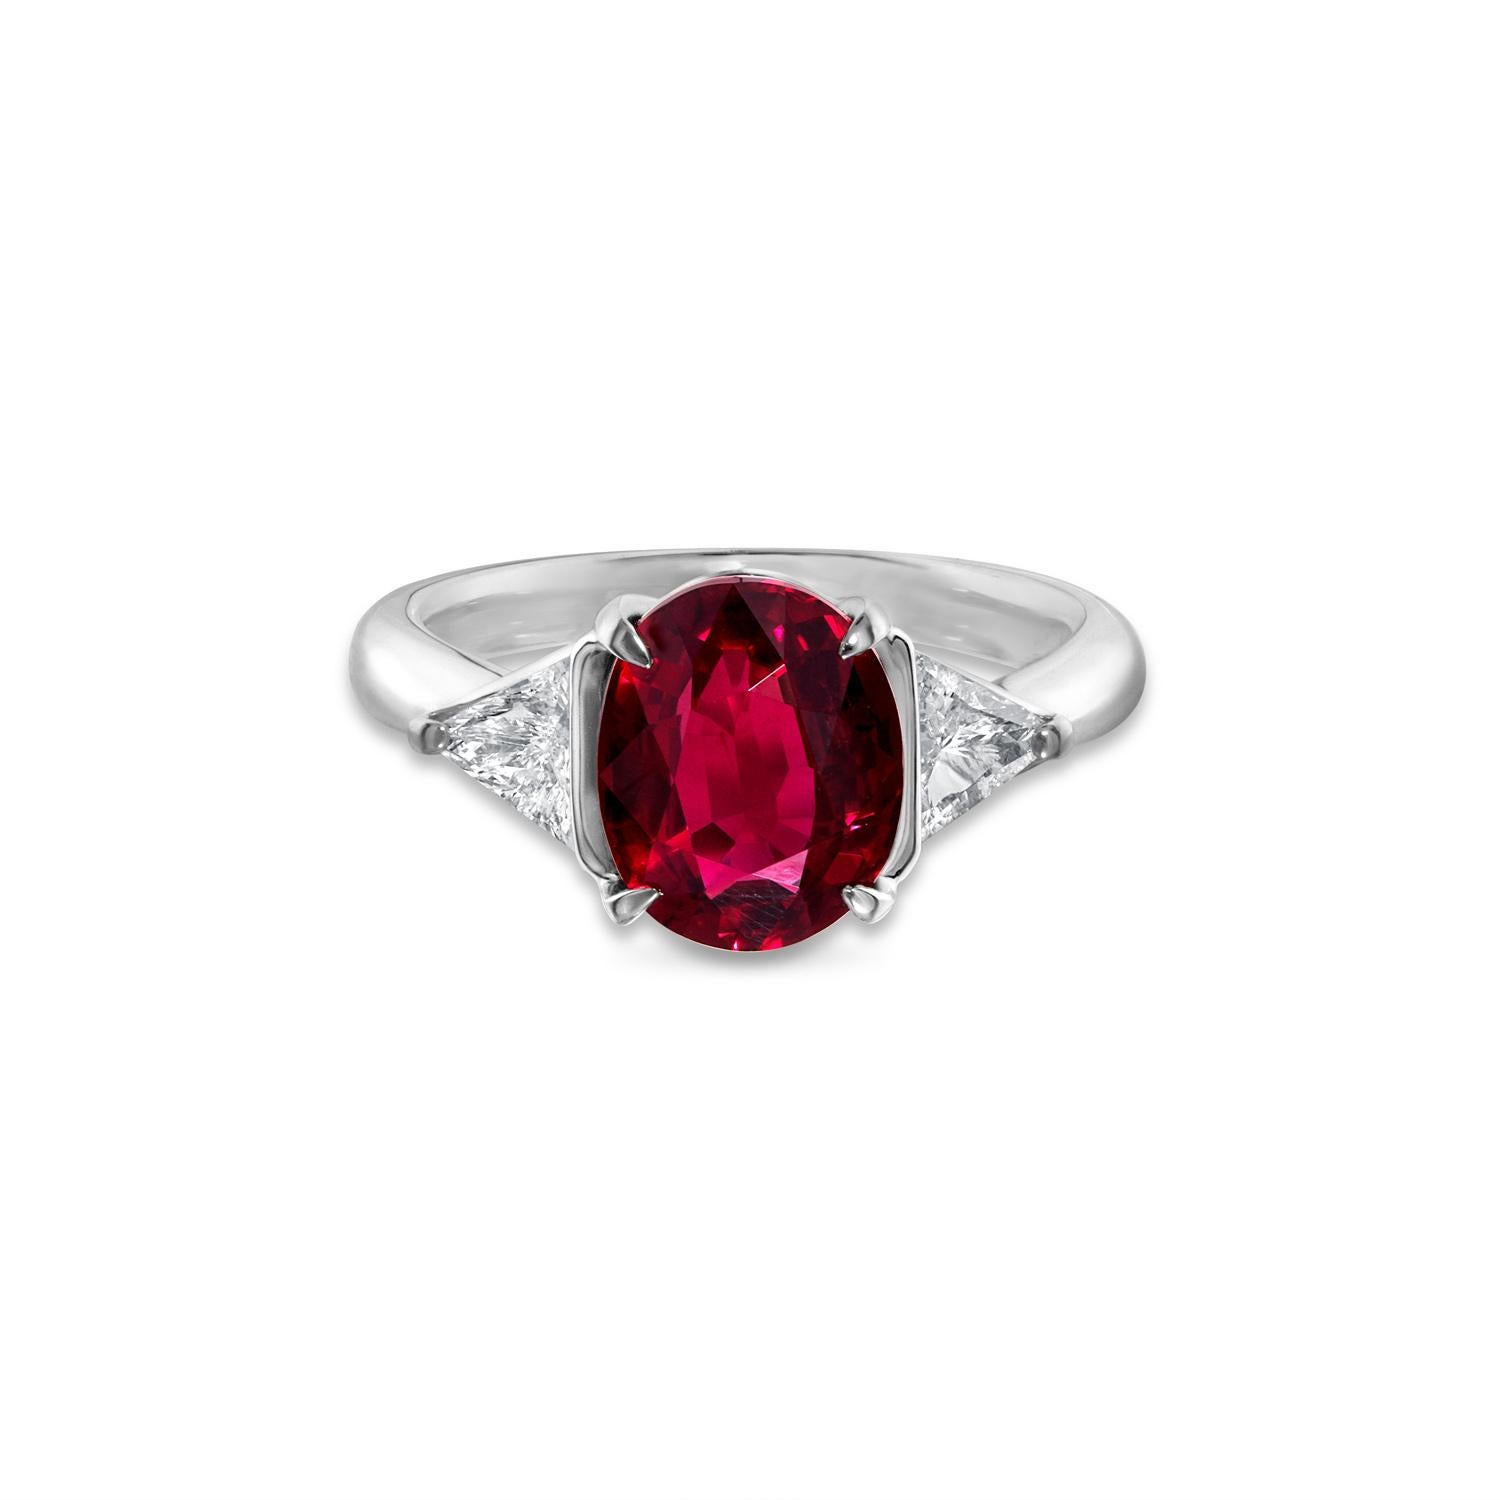 GRS Certified 3.02 Carat Pigeon Blood Ruby Ring with Diamonds